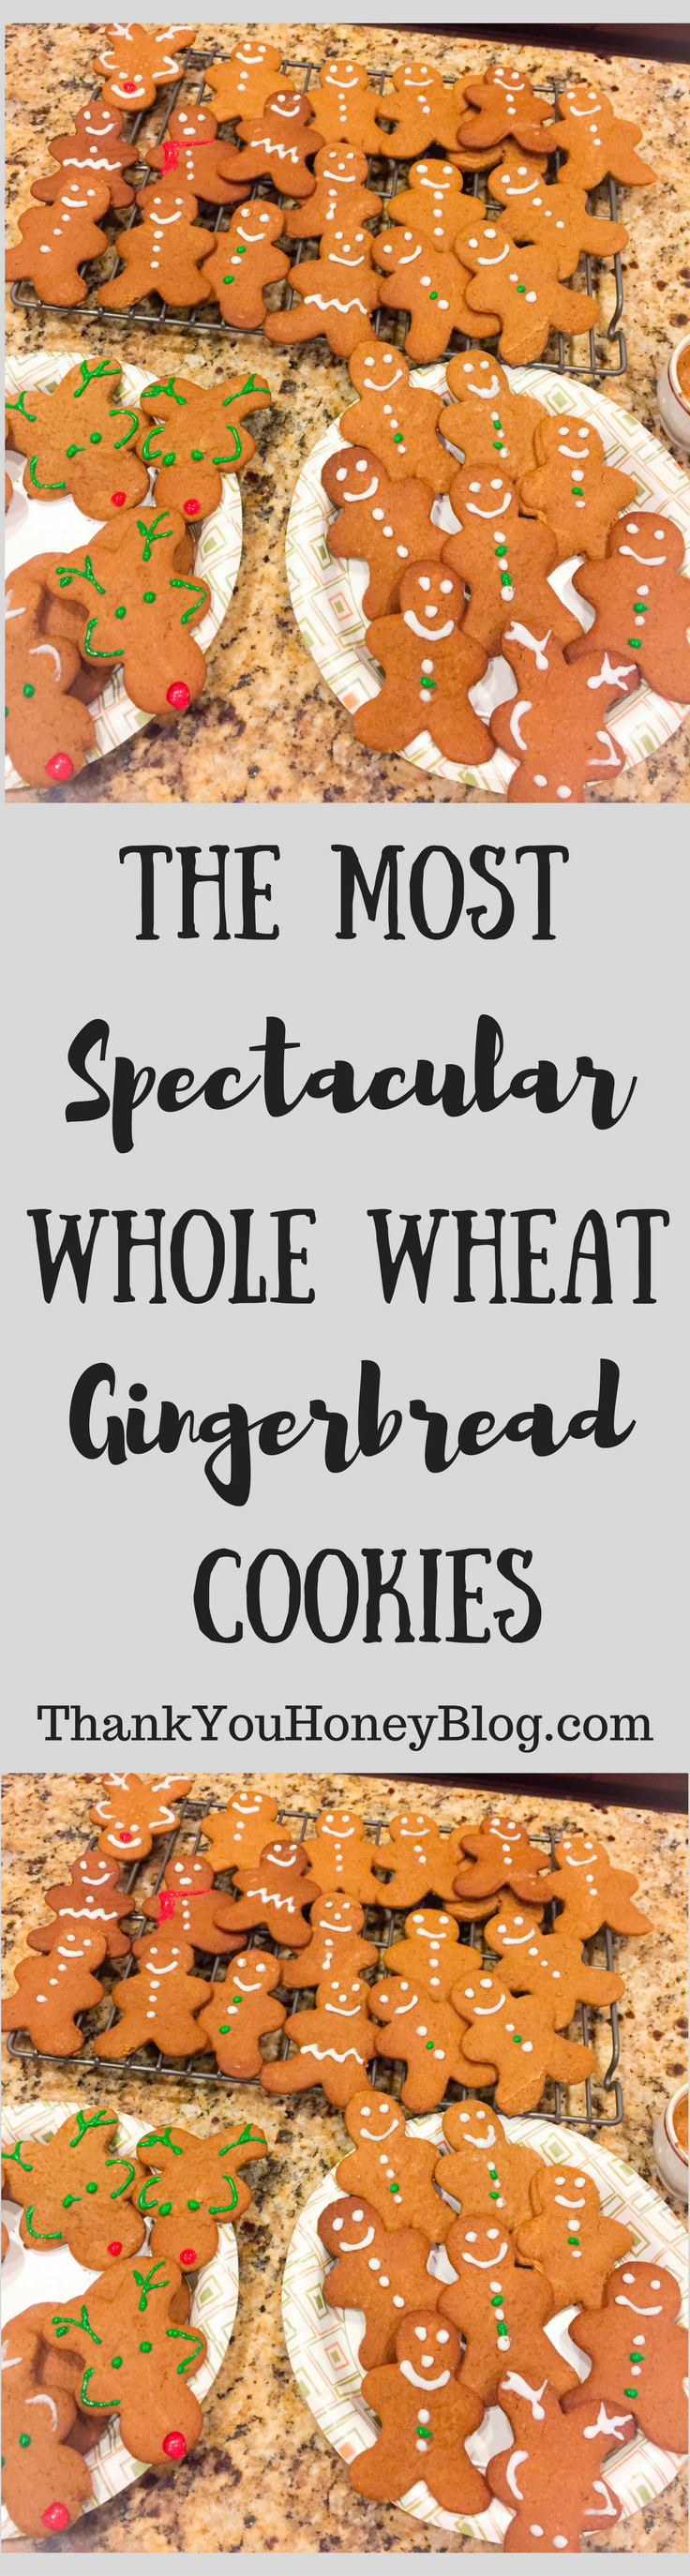 The Most Spectacular Whole Wheat Gingerbread Cookies